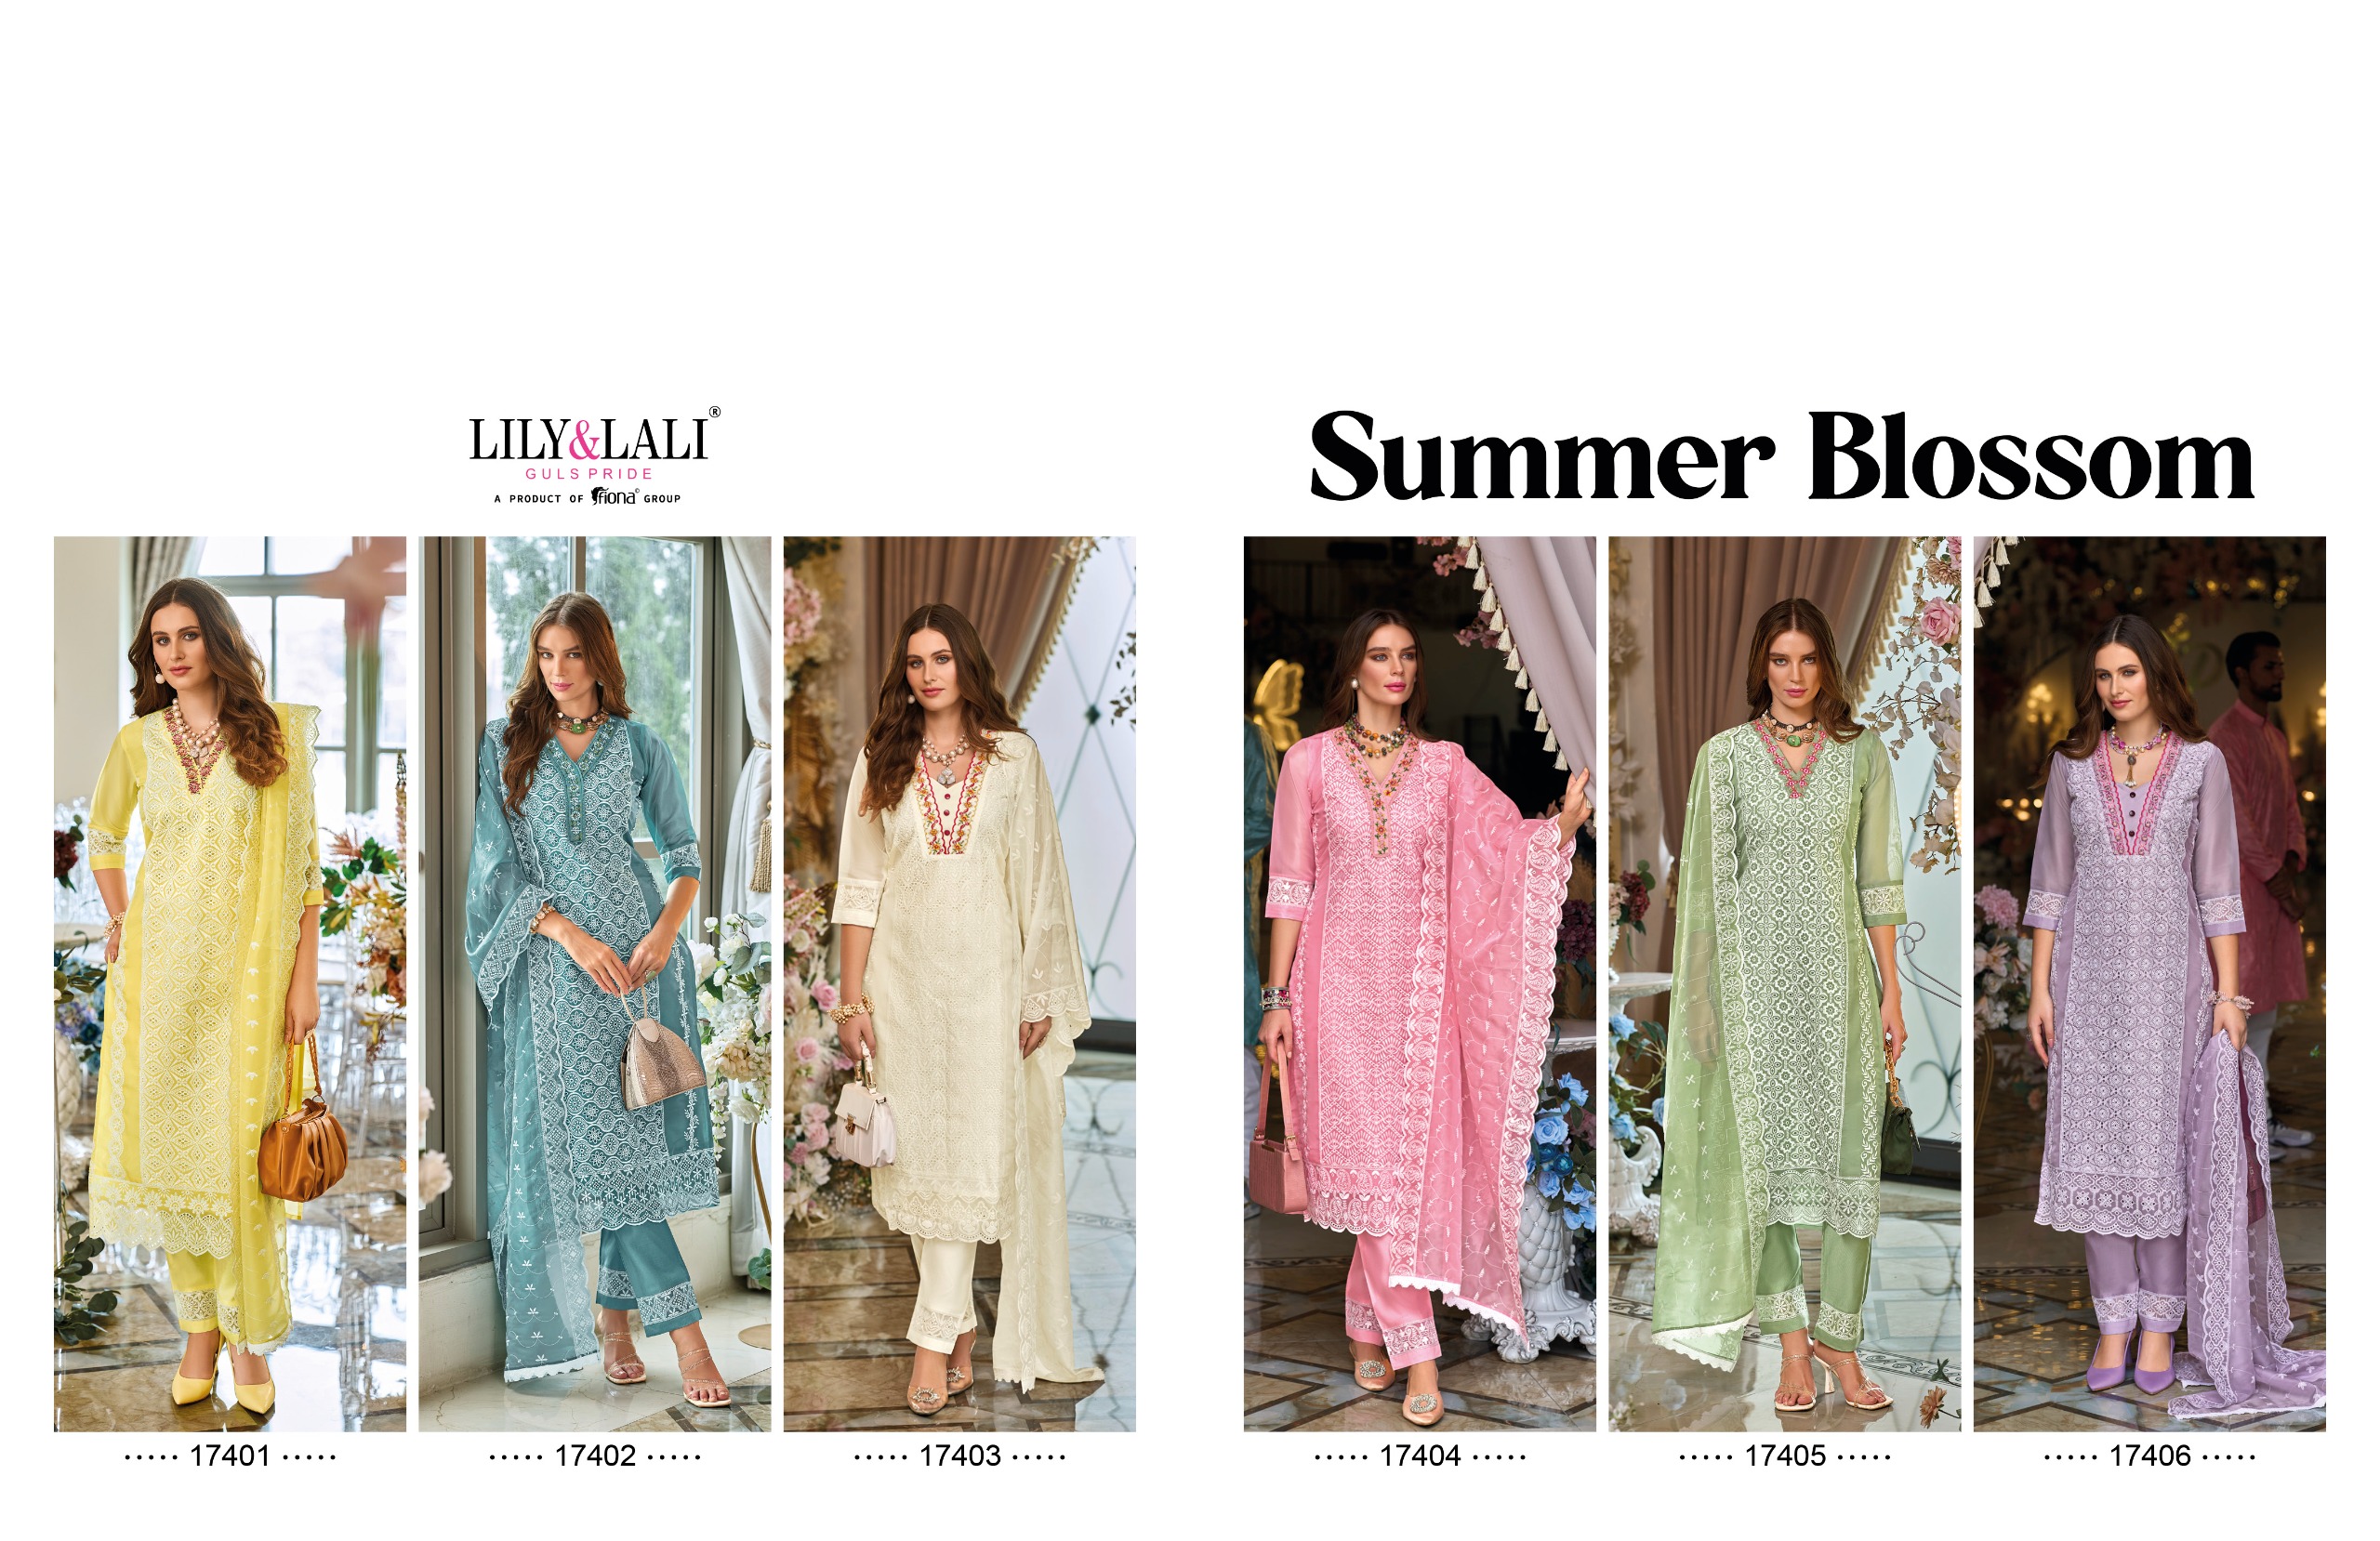 Lily And Lali Summer Blossom collection 2